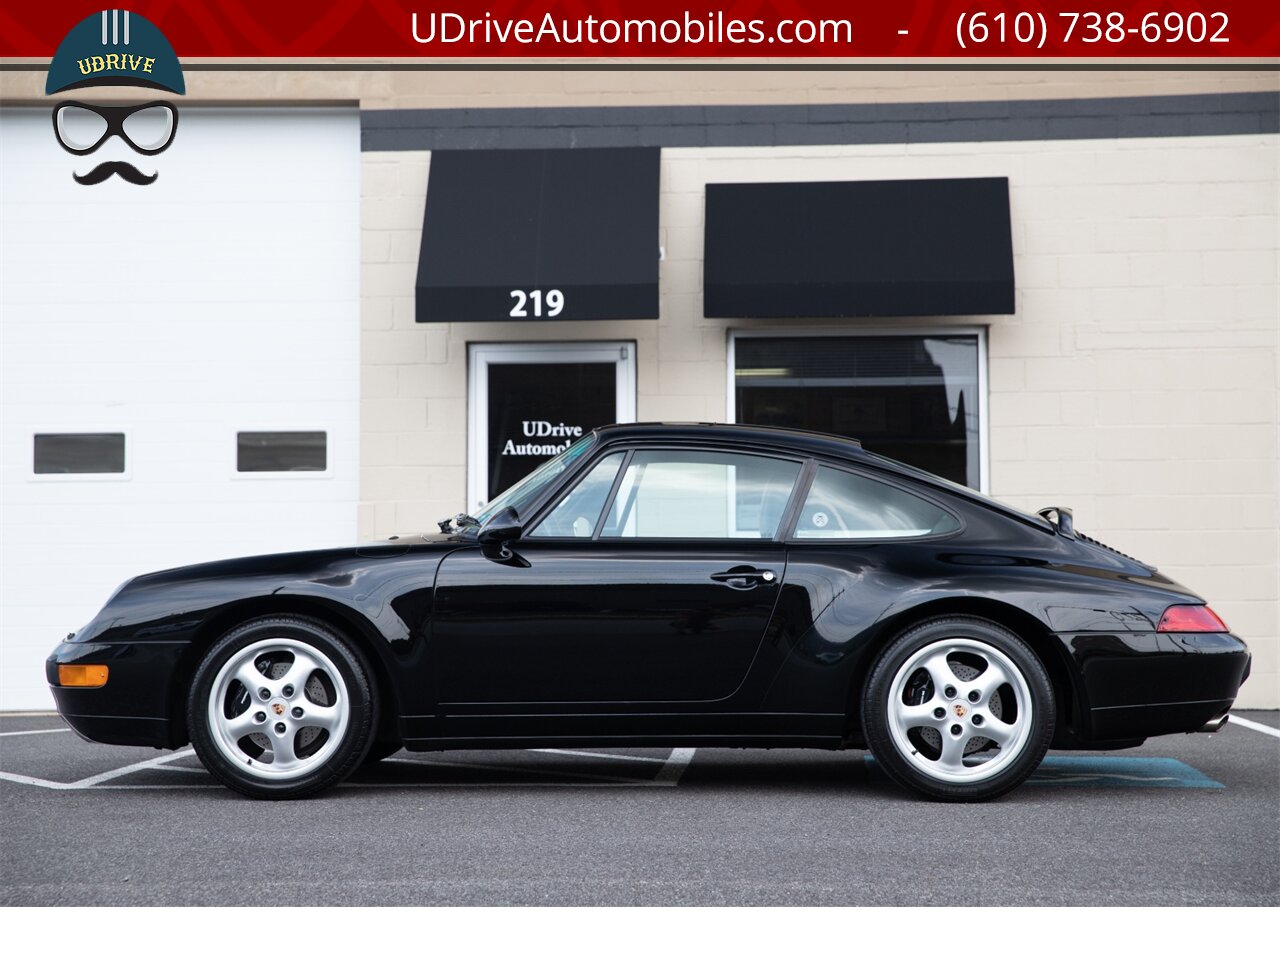 1995 Porsche 911 993 Carrera 6 Speed 16k Miles Service History  Black over Black Spectacular Stock Example 1 Owner Clean Carfax - Photo 6 - West Chester, PA 19382